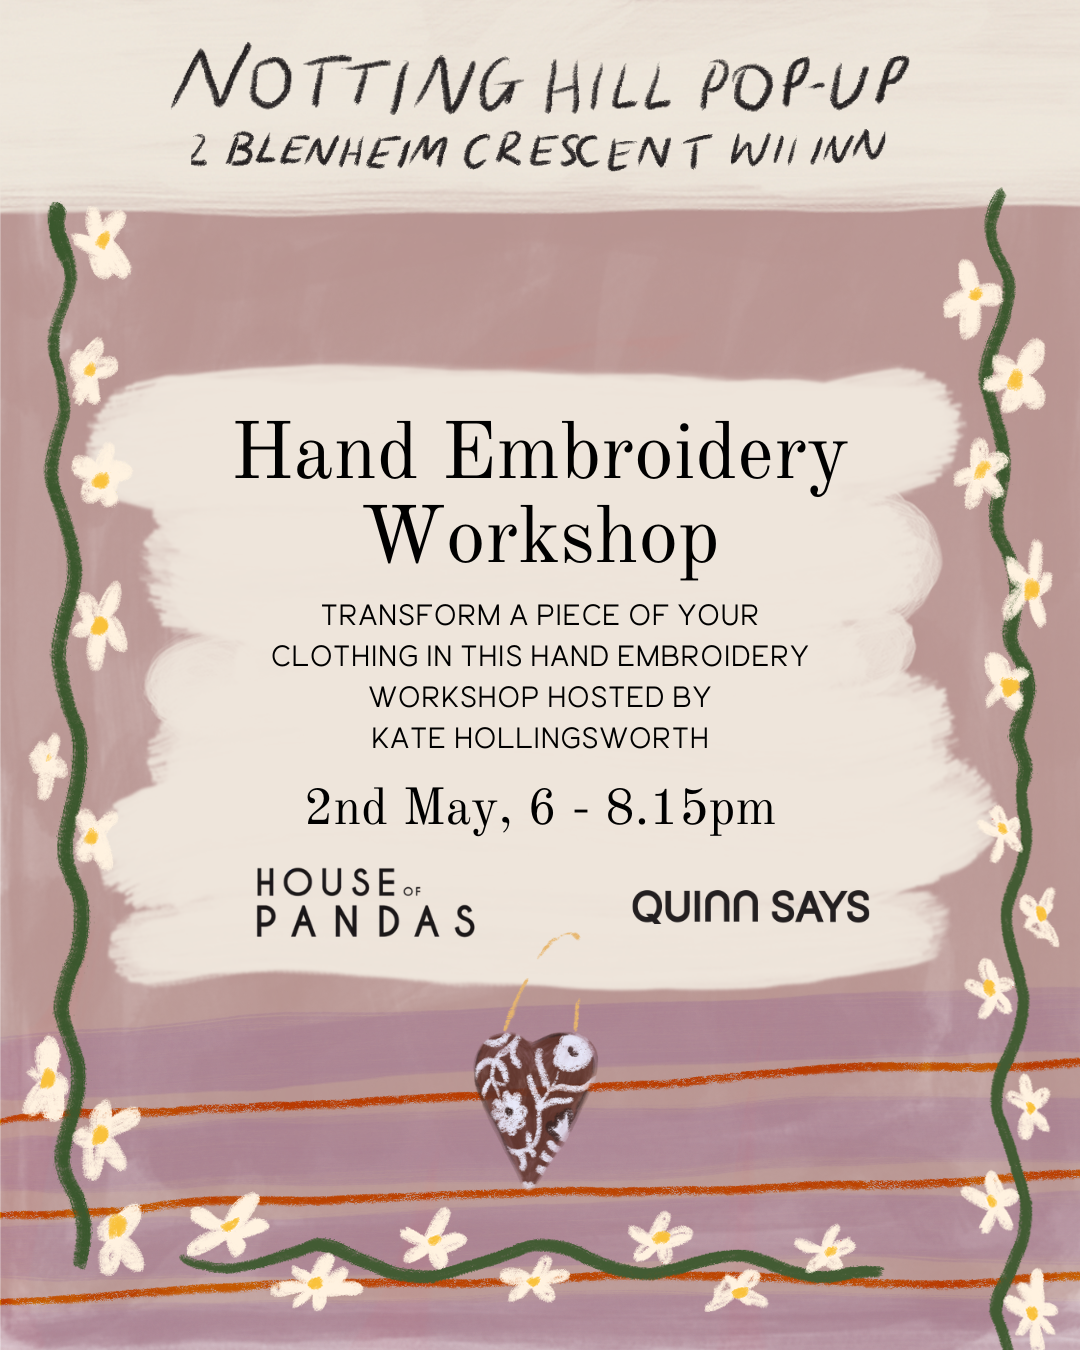  Hand Embroidery Workshop Notting Hill Pop-up